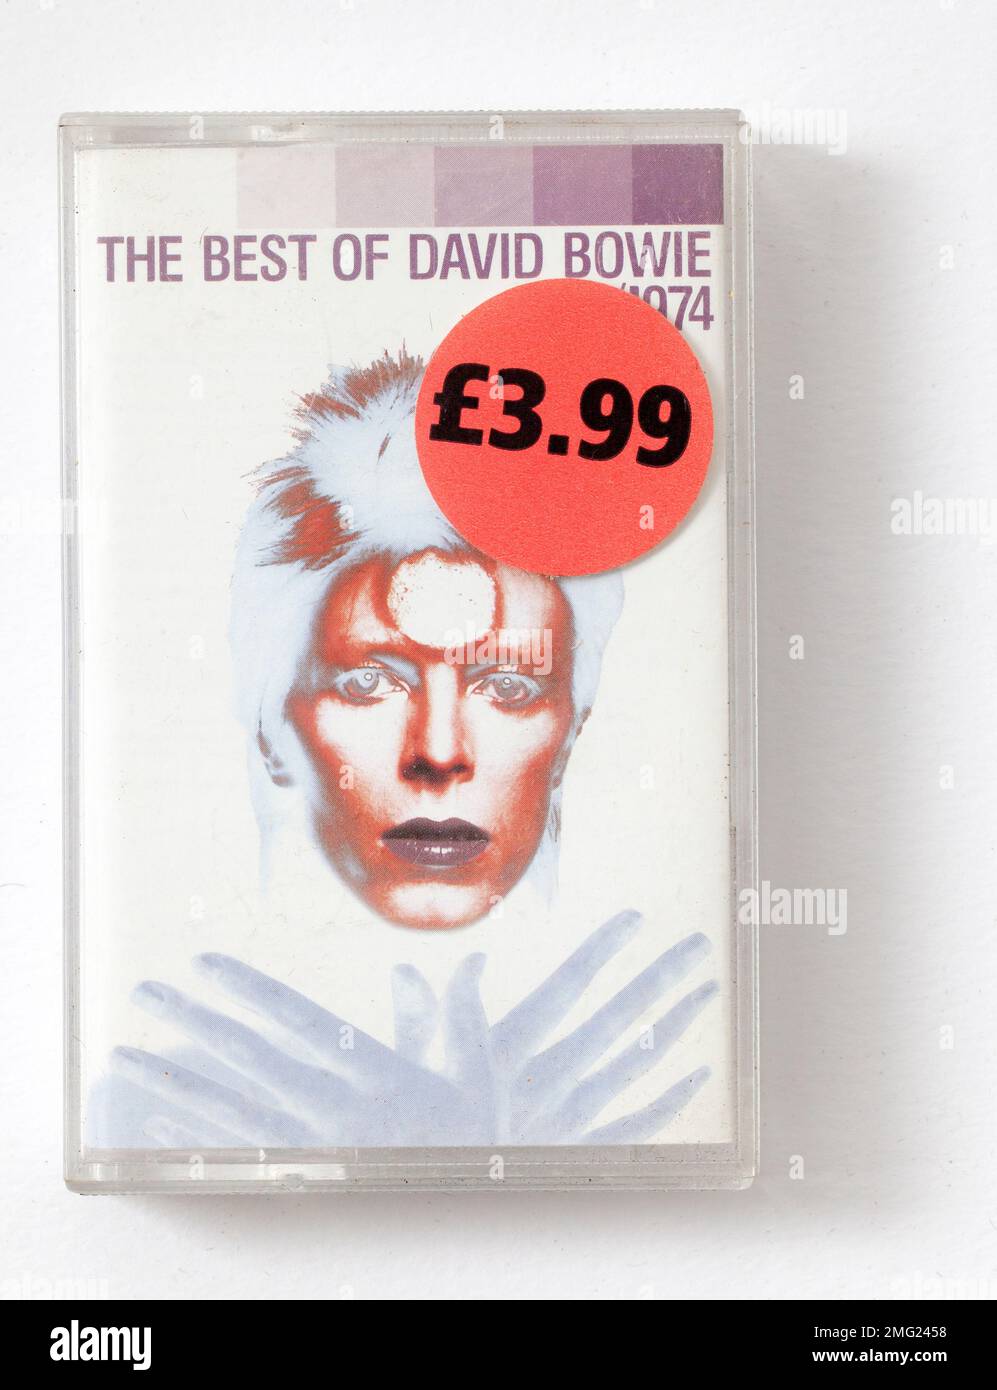 The Best of David Bowie Music Cassette Stock Photo